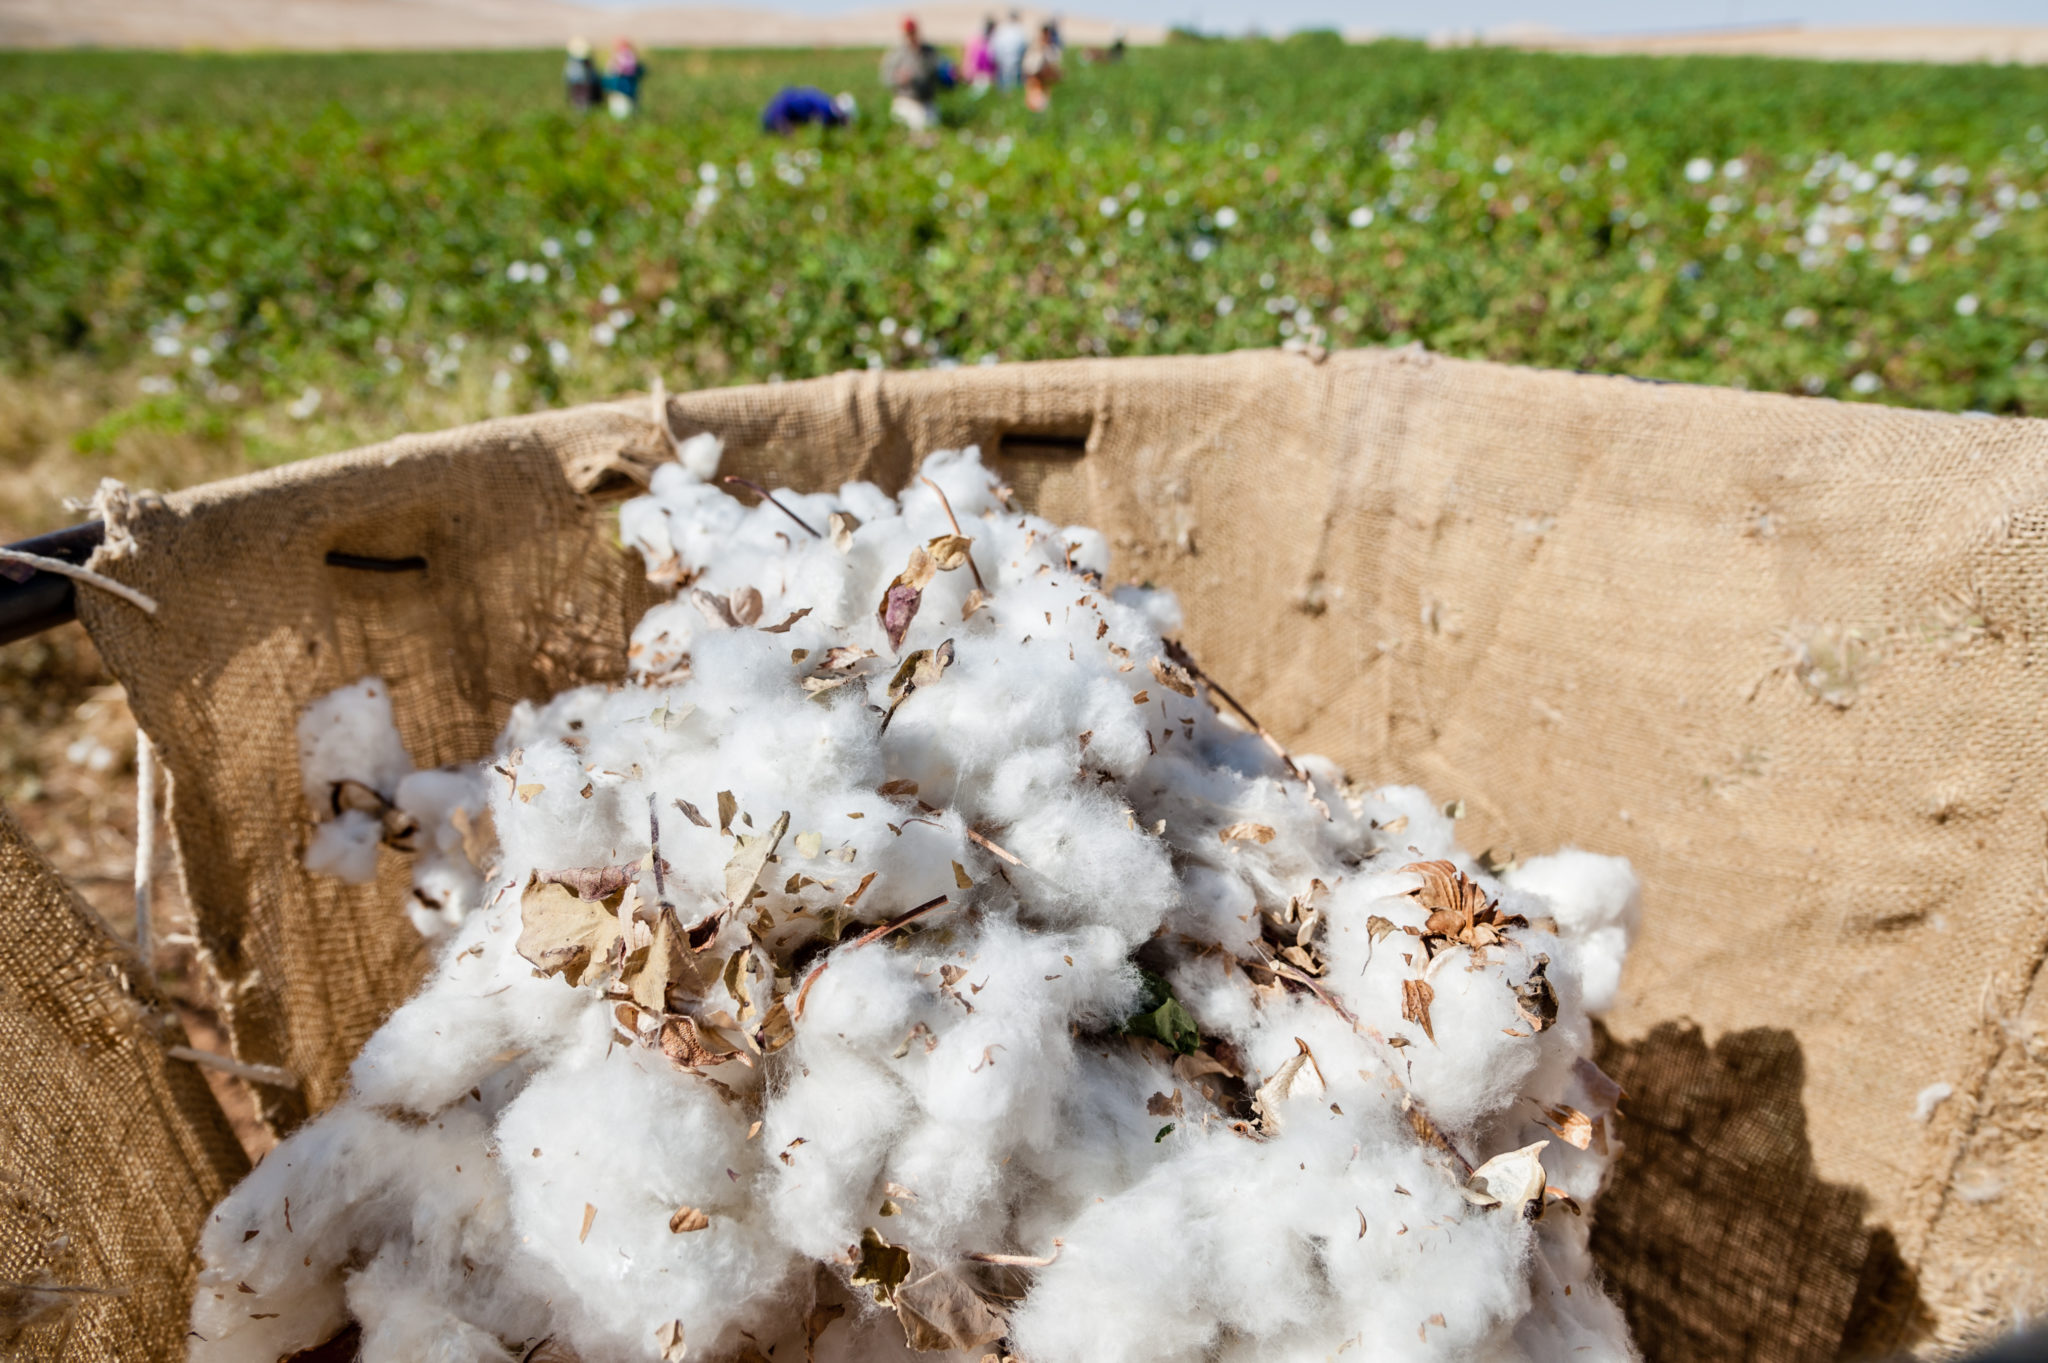 Collecting cotton